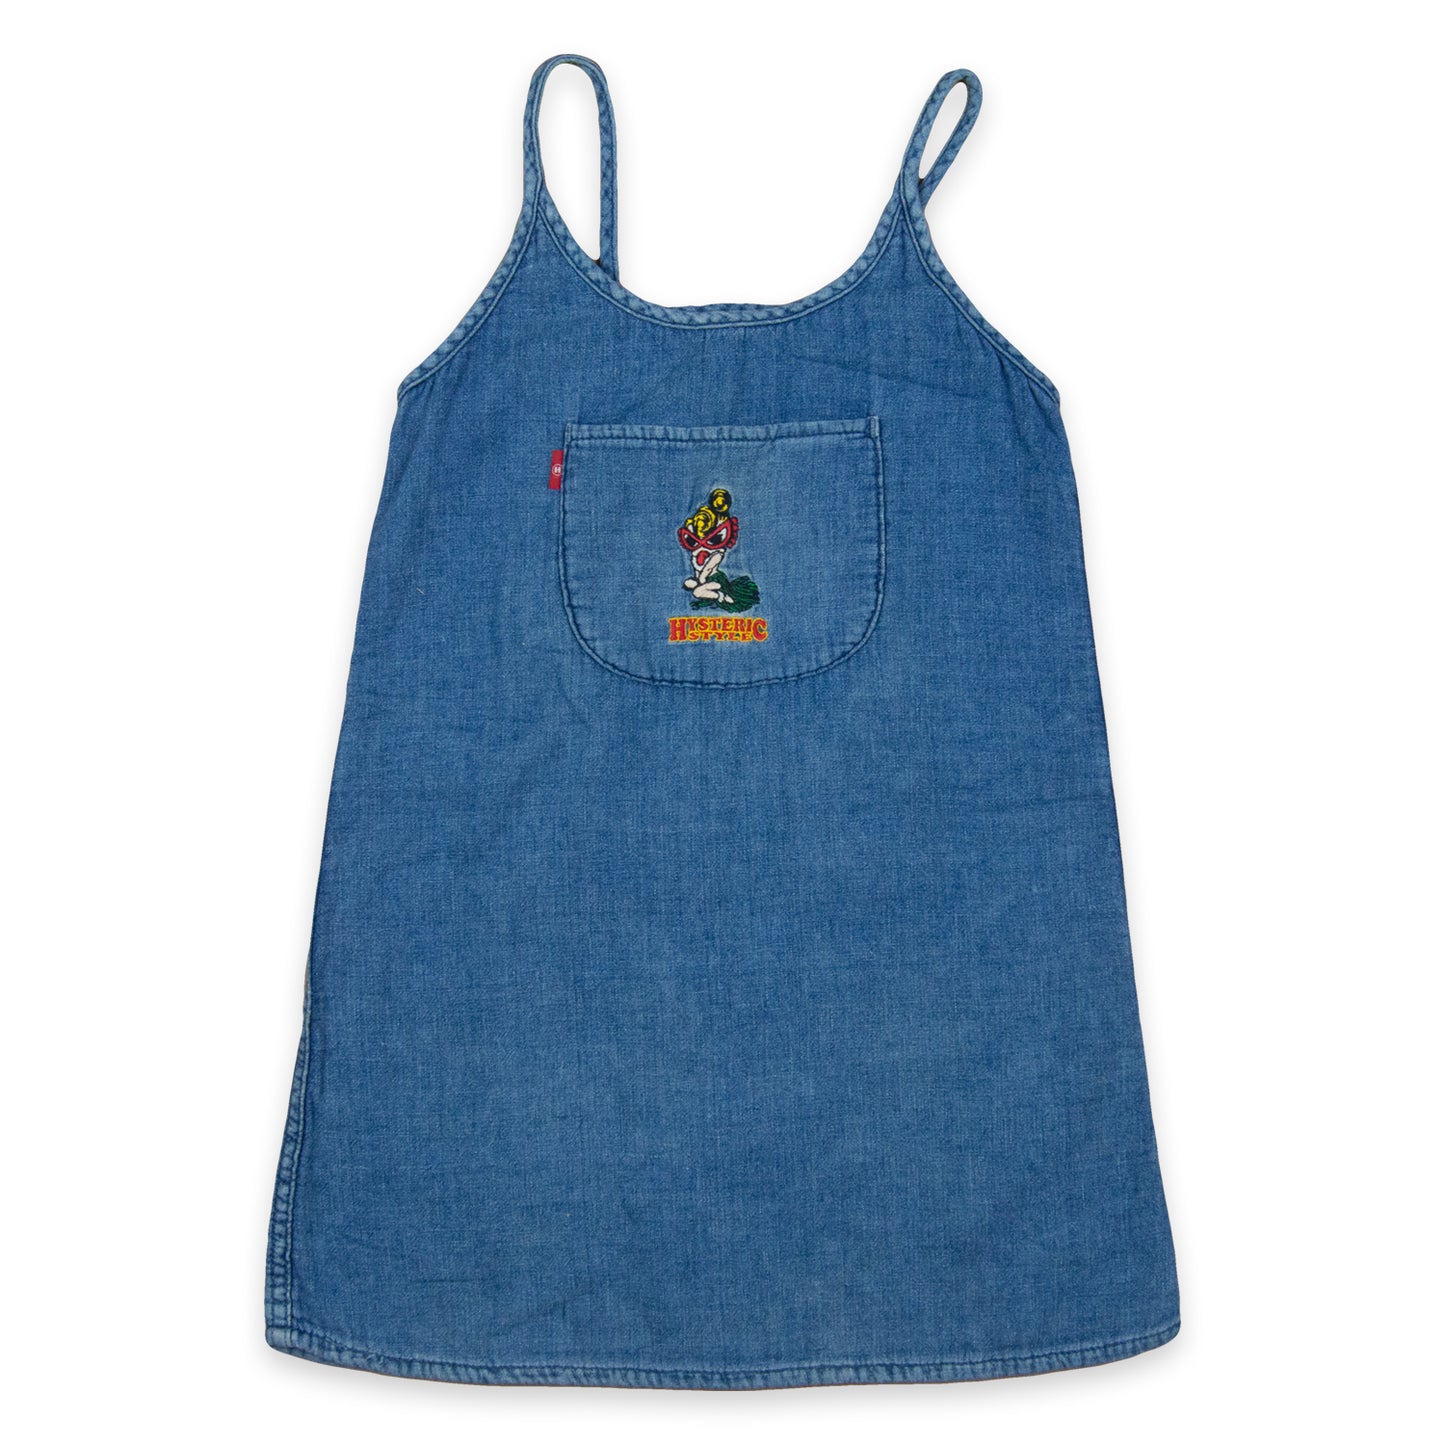 Hysteric Glamour Embroidered Denim Tank Top